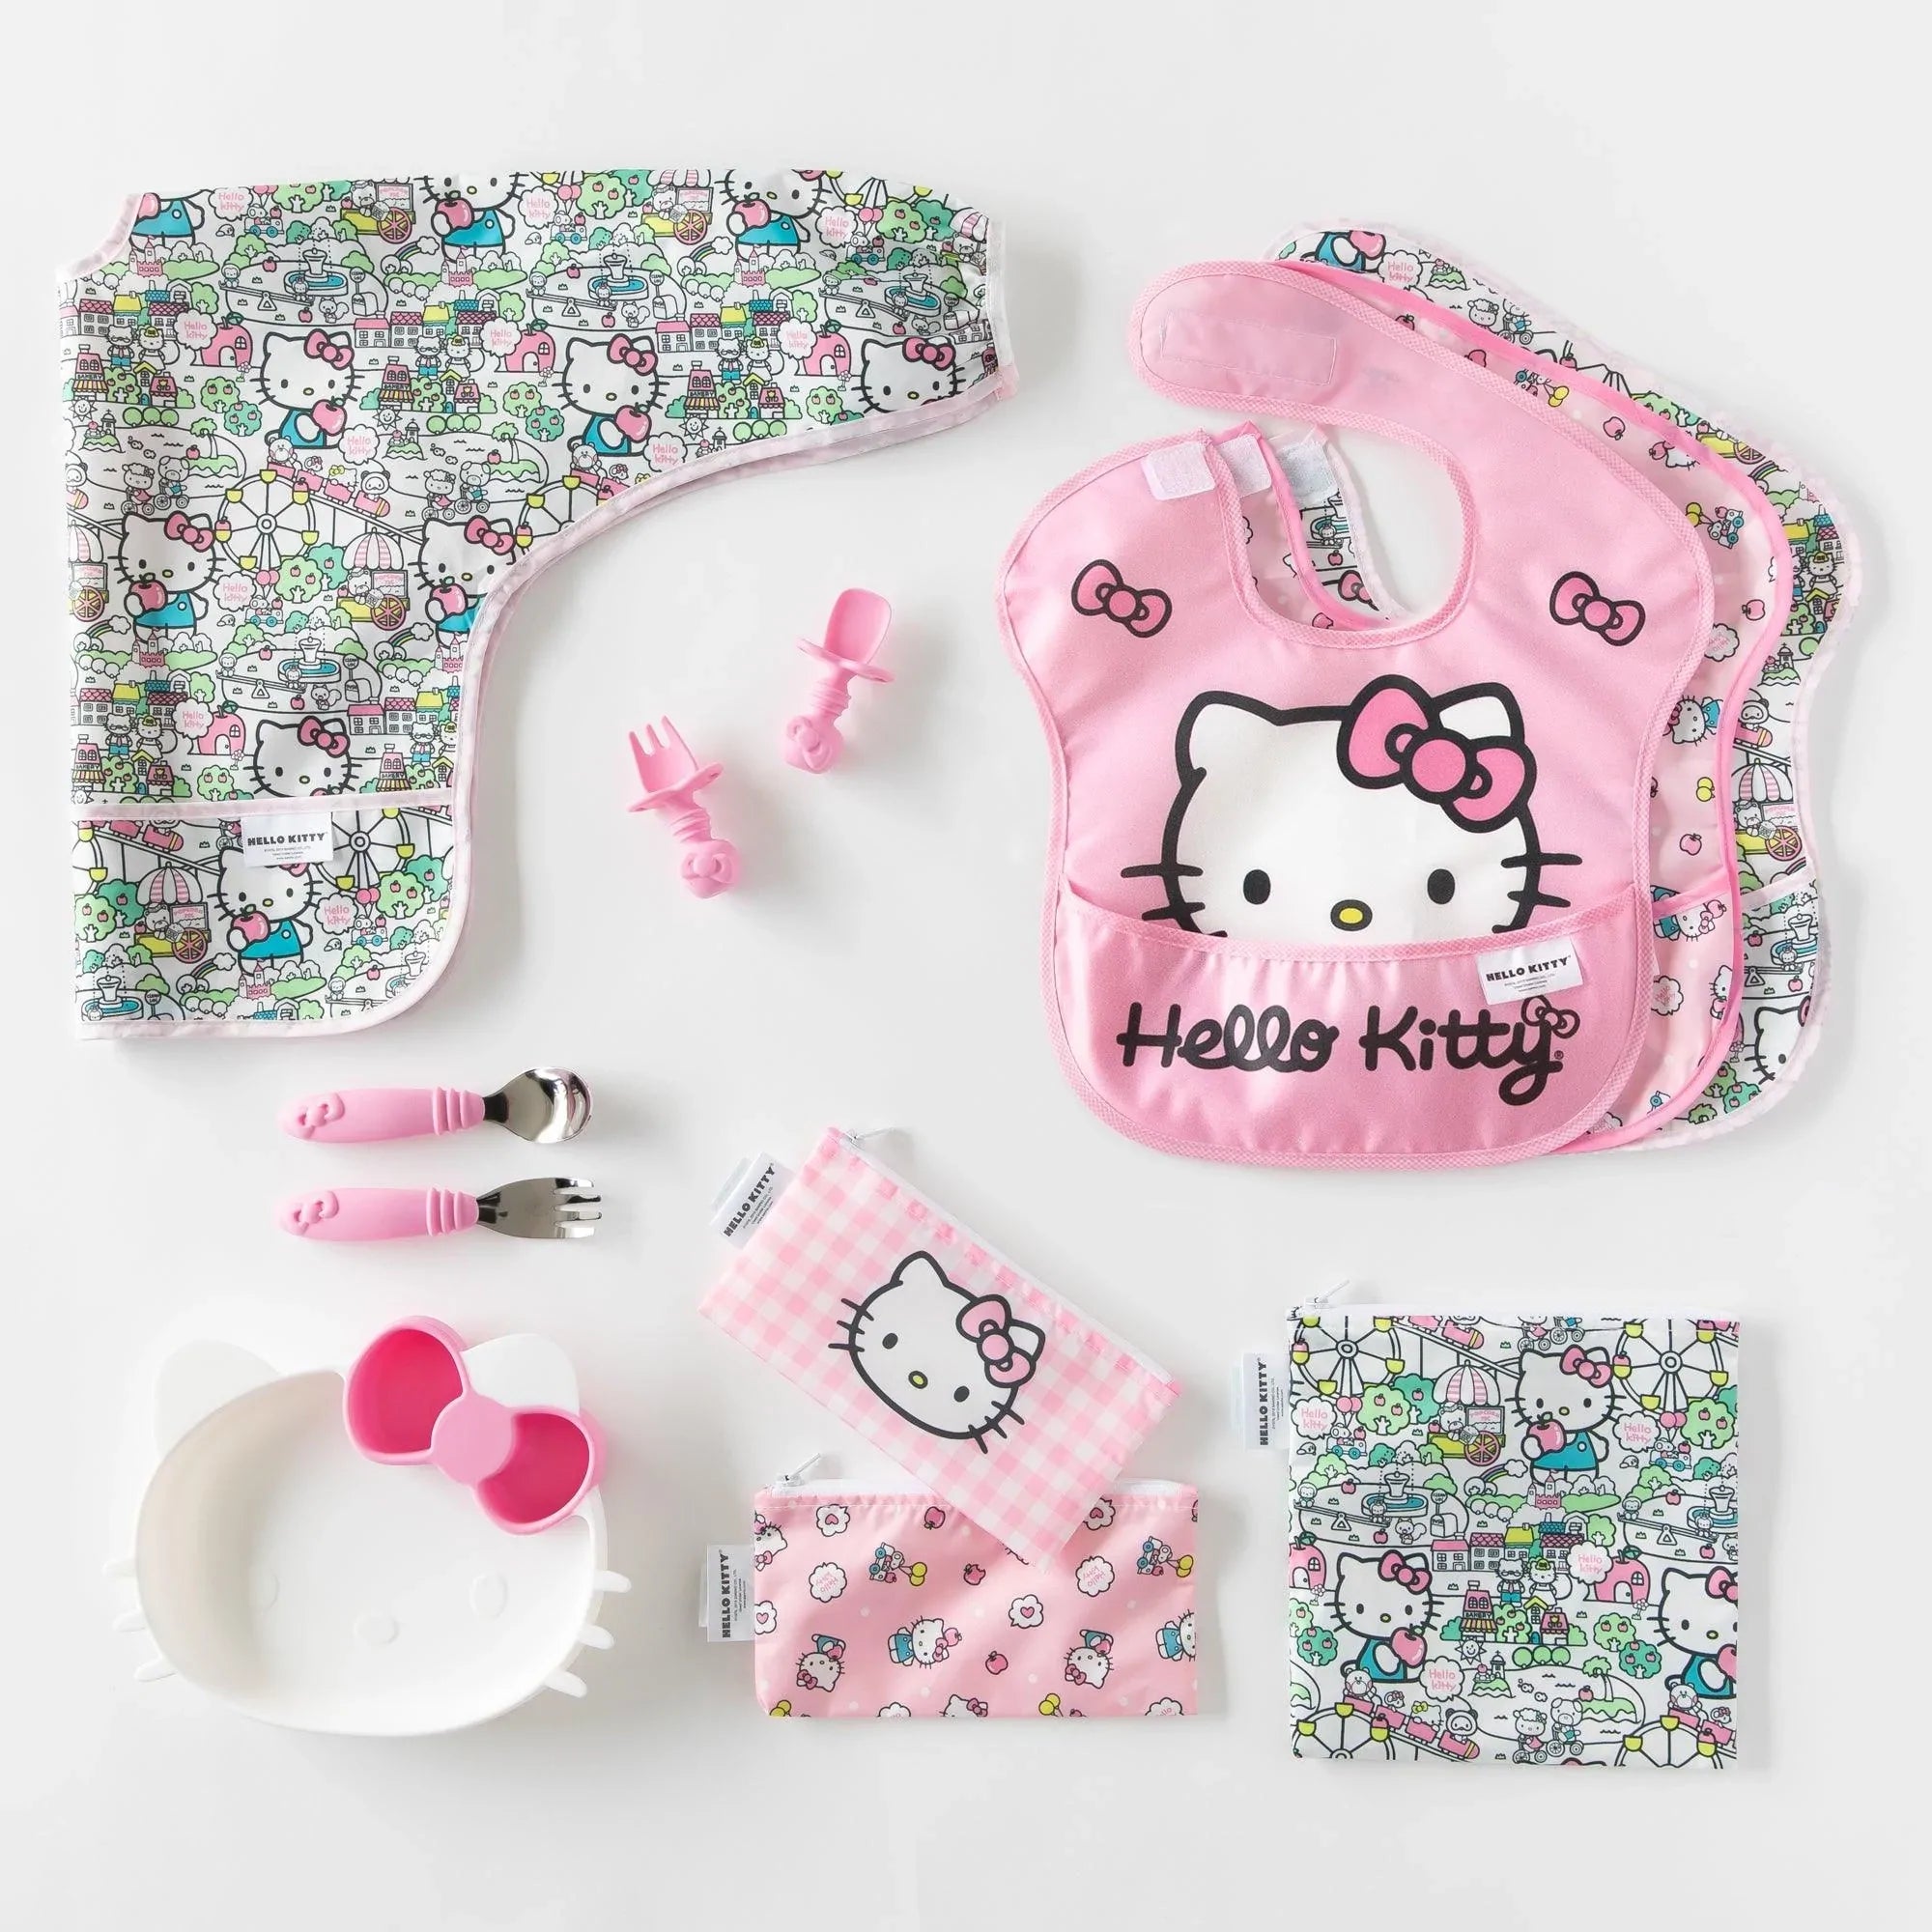  Hello Kitty Lunch Box Set - Bundle with Hello Kitty Lunch Box  for Girls, Hello Kitty Stickers, More